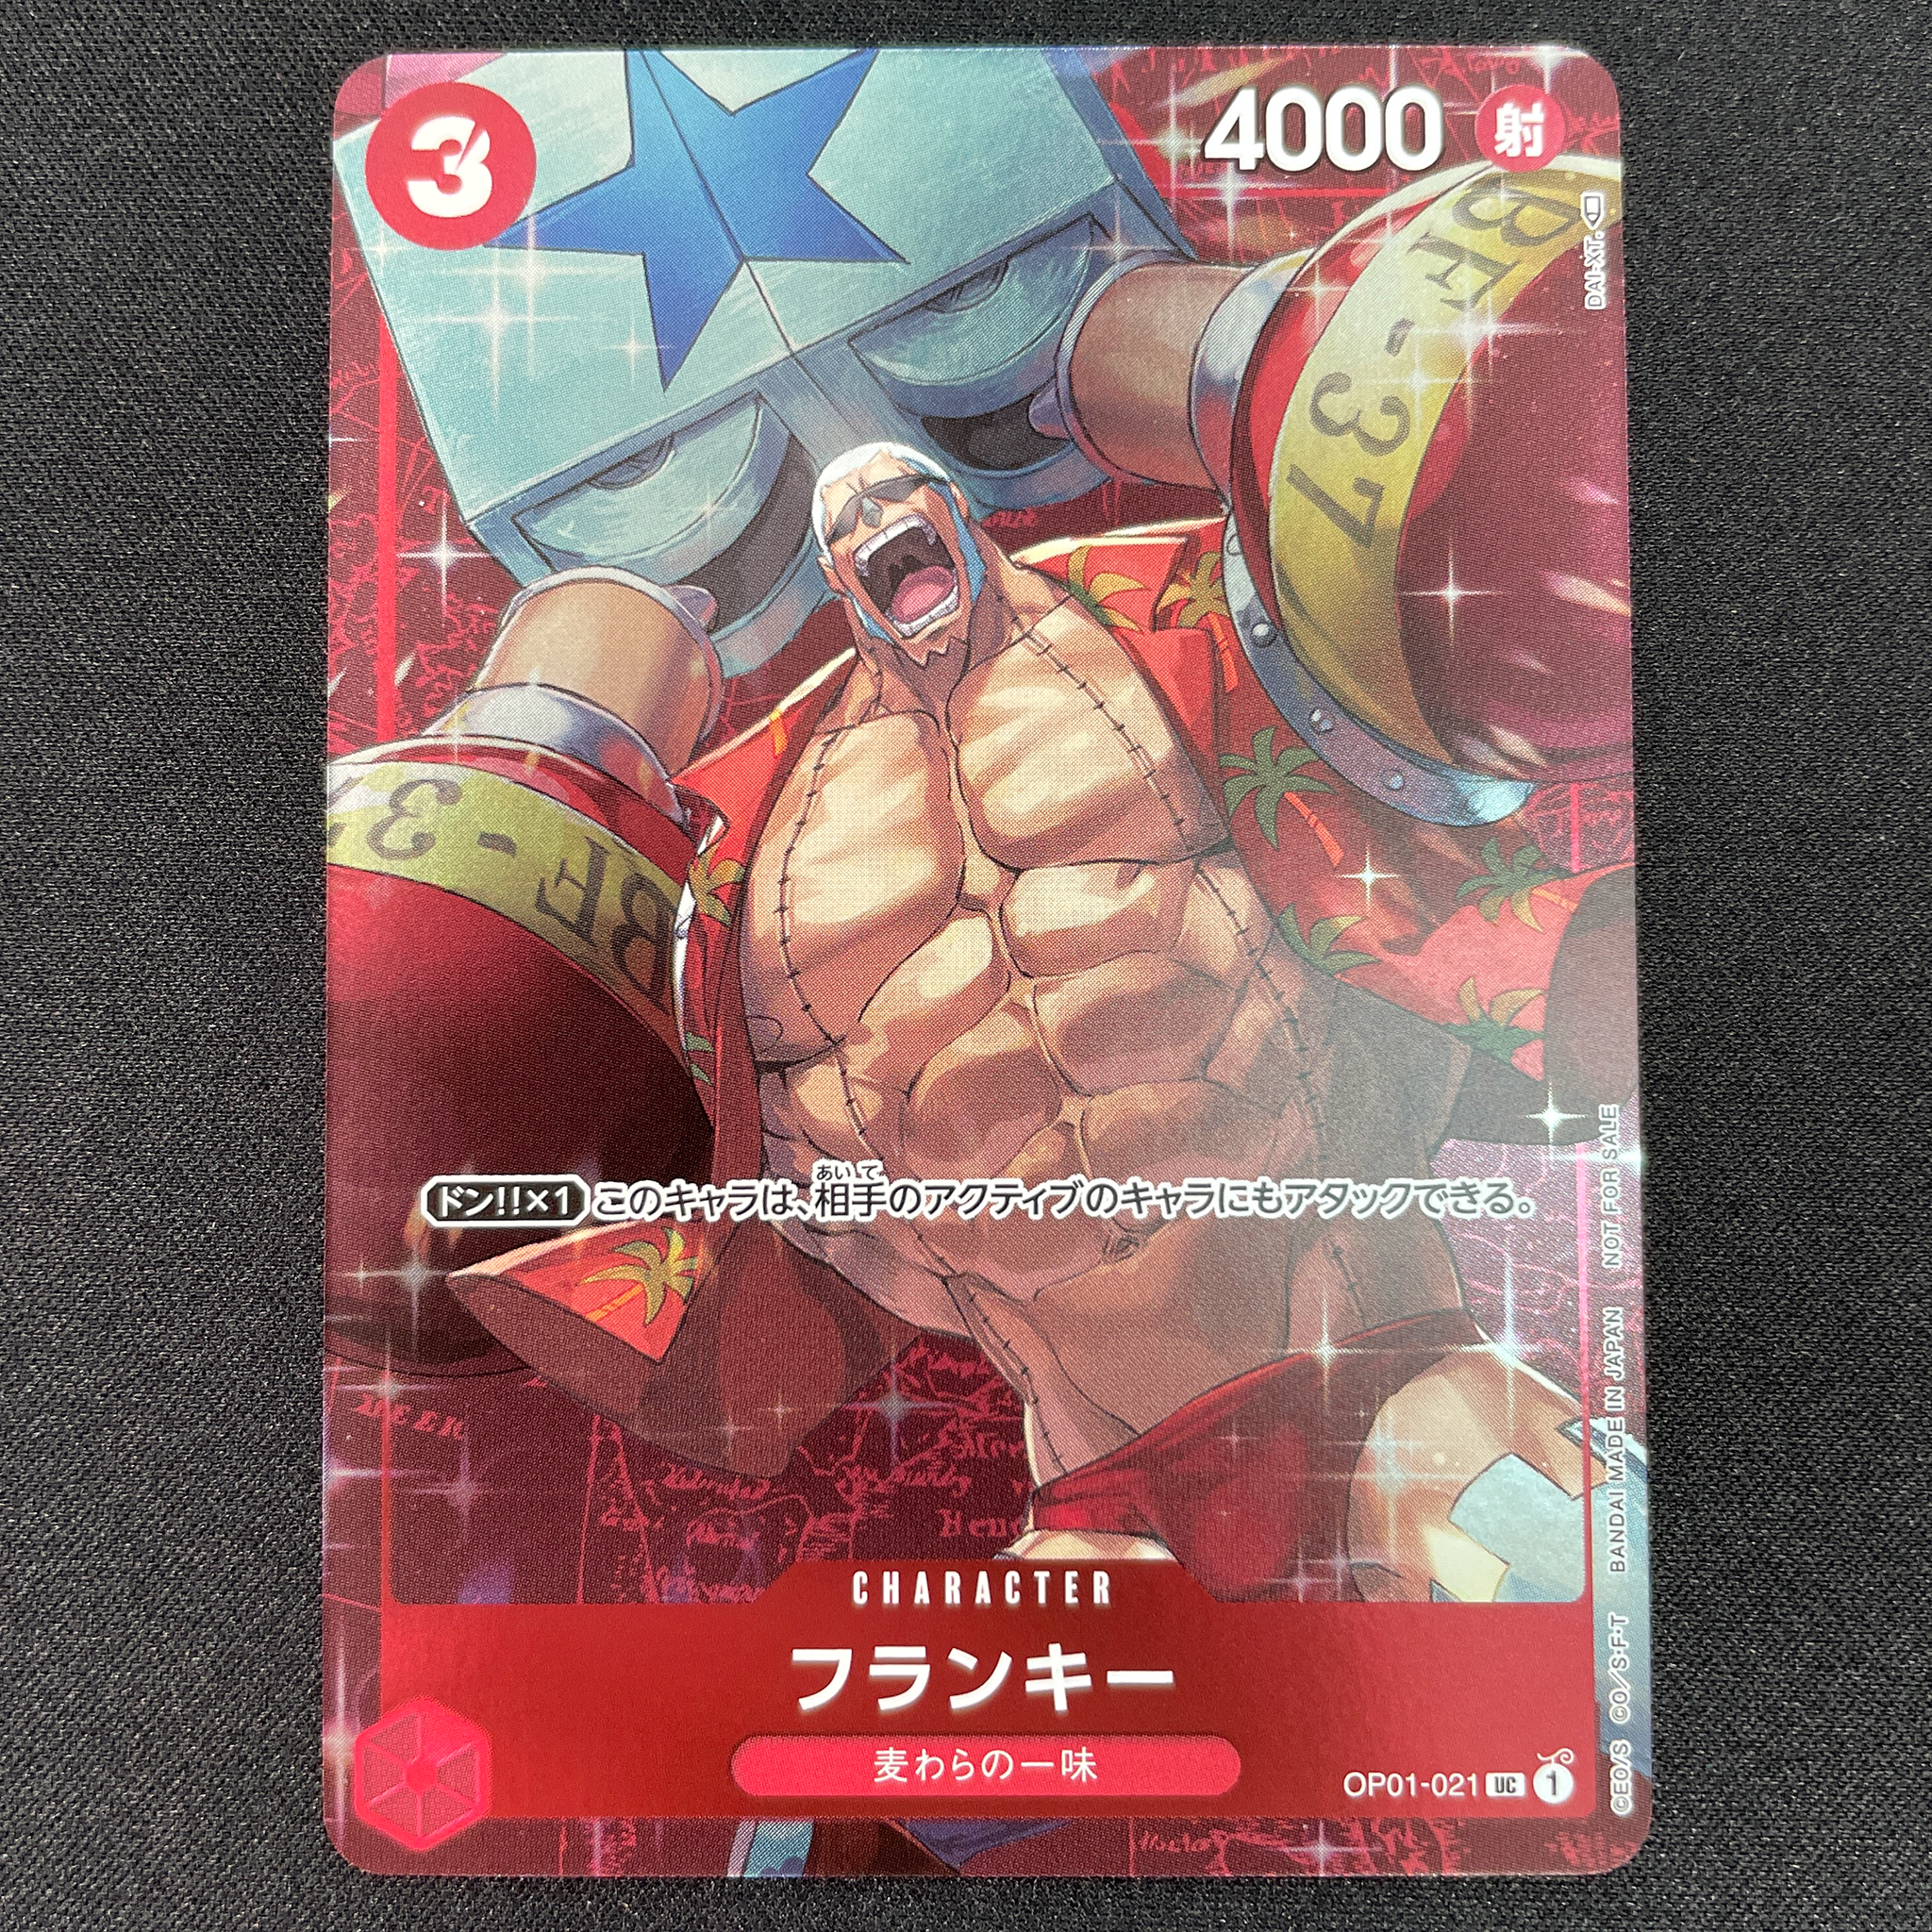 ONE PIECE CARD GAME ｢ROMANCE DAWN｣  ONE PIECE CARD GAME OP01-021 Uncommon Parallel Foil card  Franky